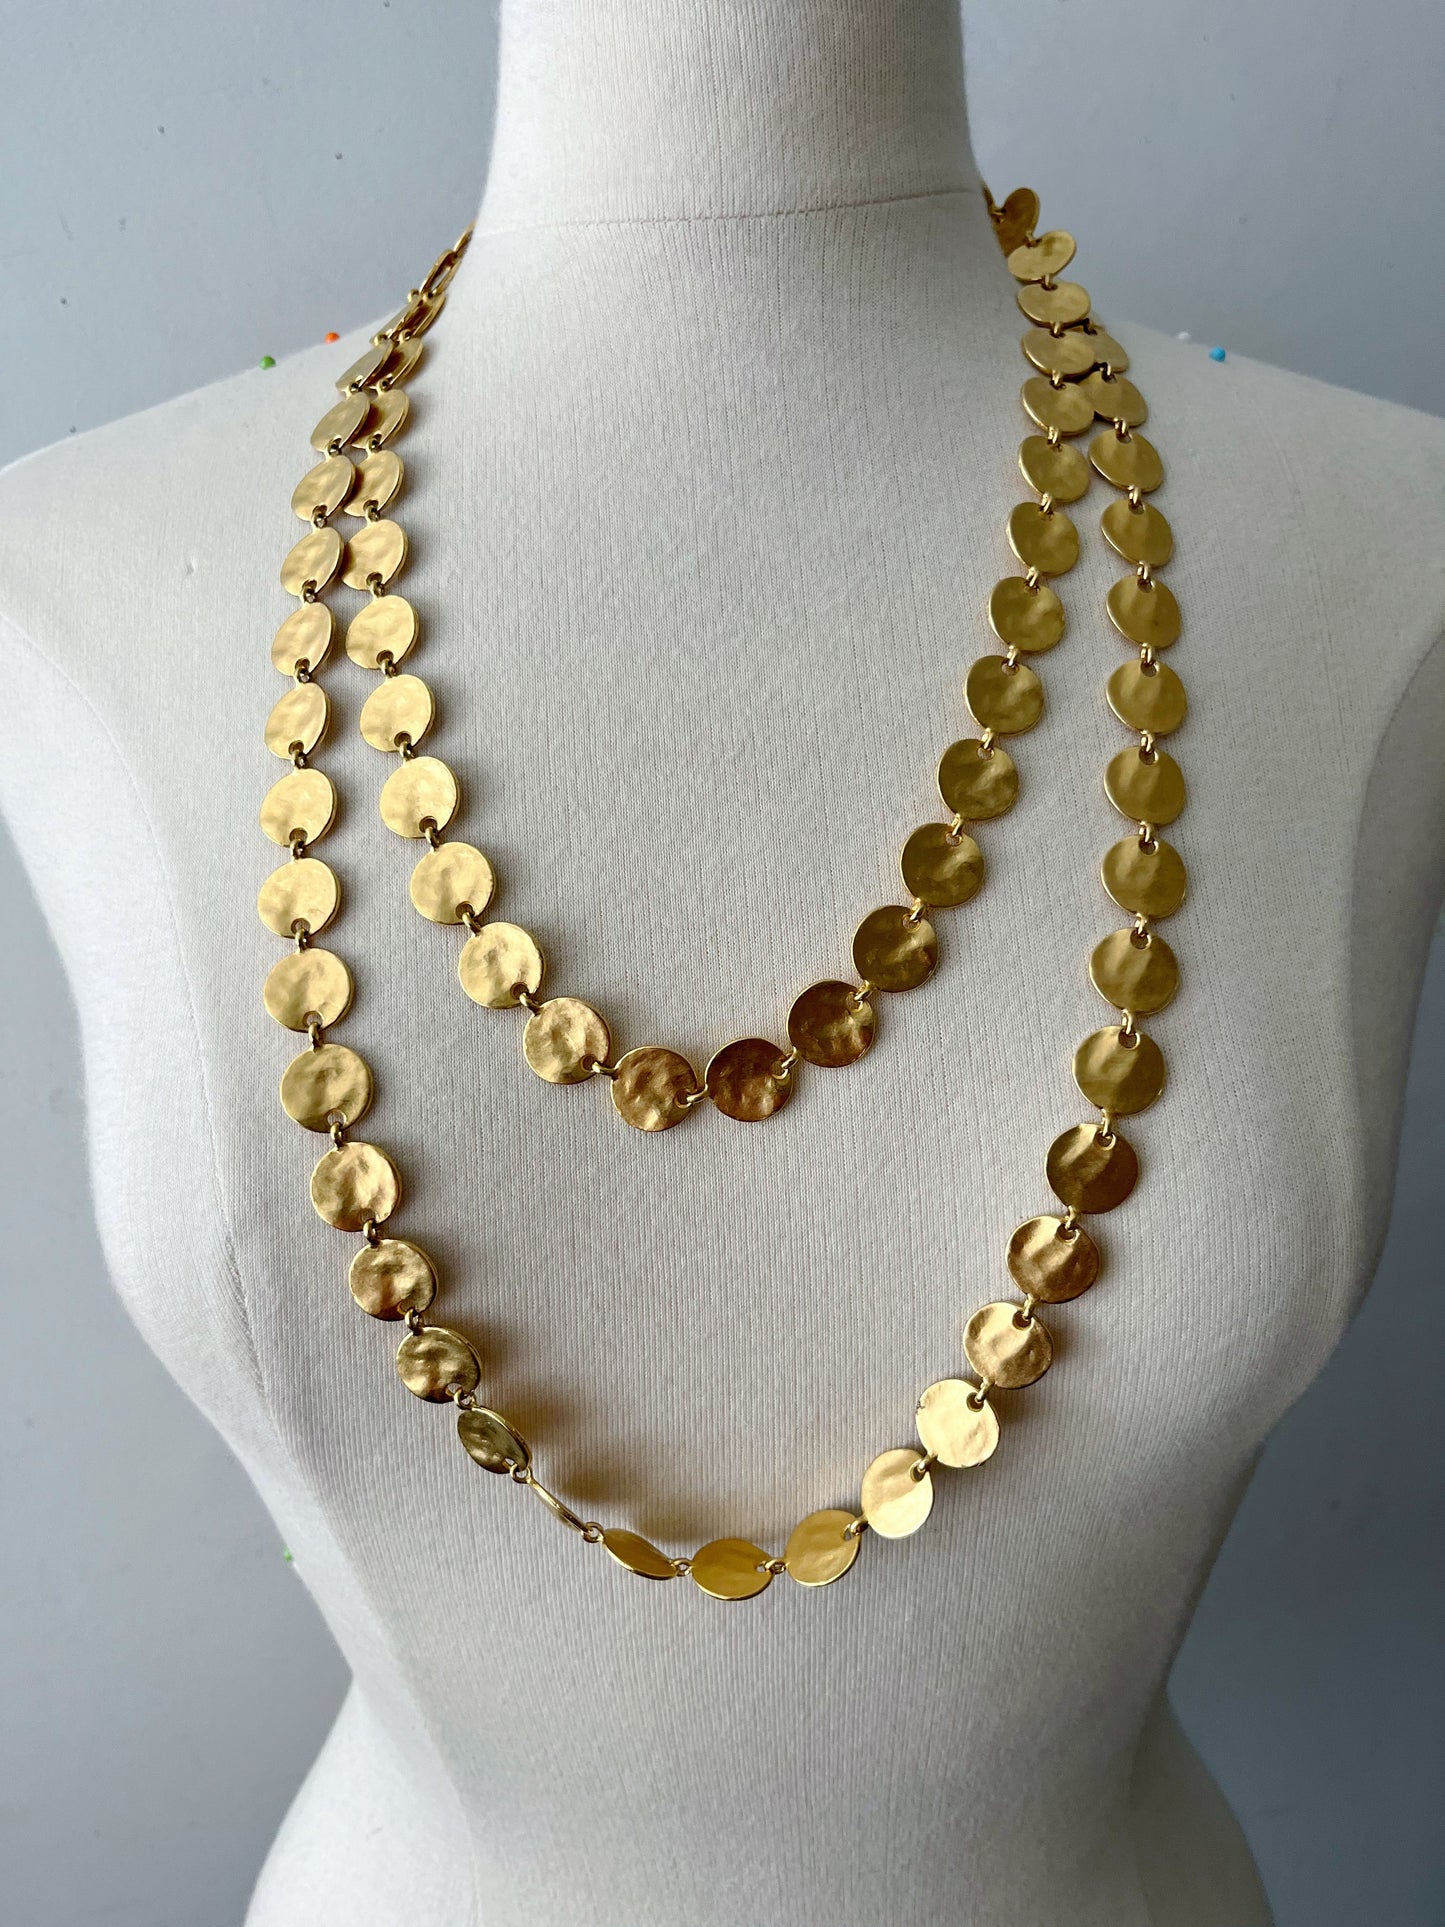 Hammered Coins Necklace